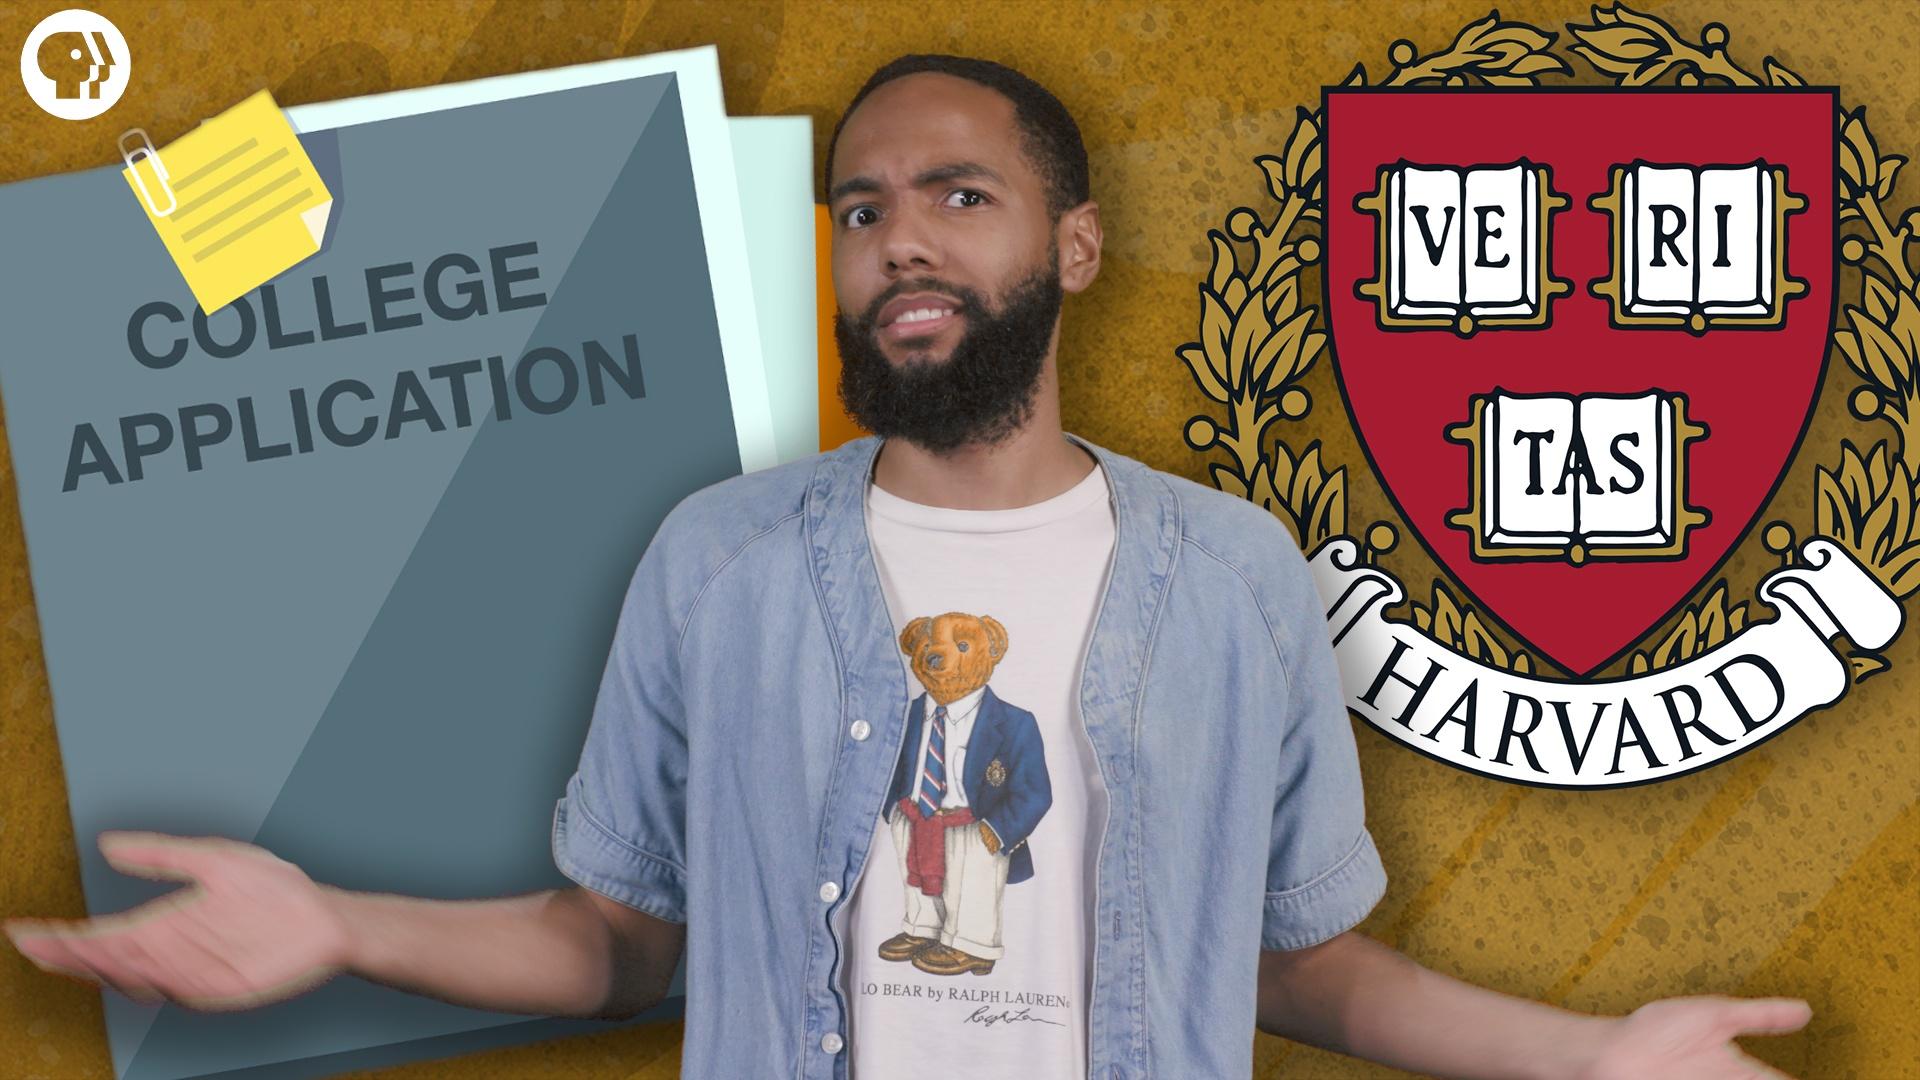 Affirmative Action: Should Race Be a Factor in College Admissions